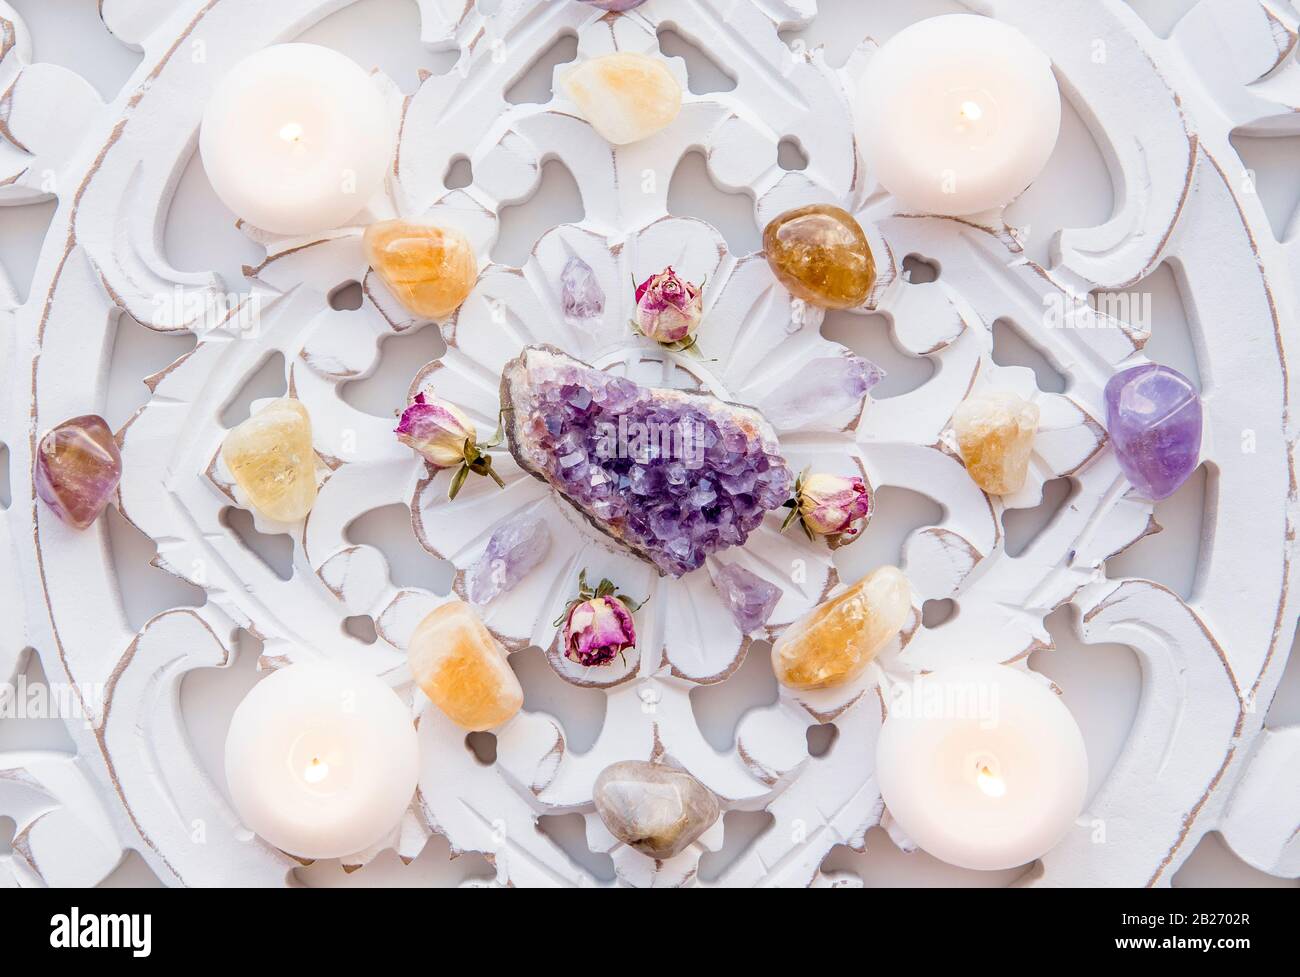 Semi precious stone crystal grid in home helps intentions to manifest concept. Alternative lifestyle. Relaxation and balance, wealth. Stock Photo